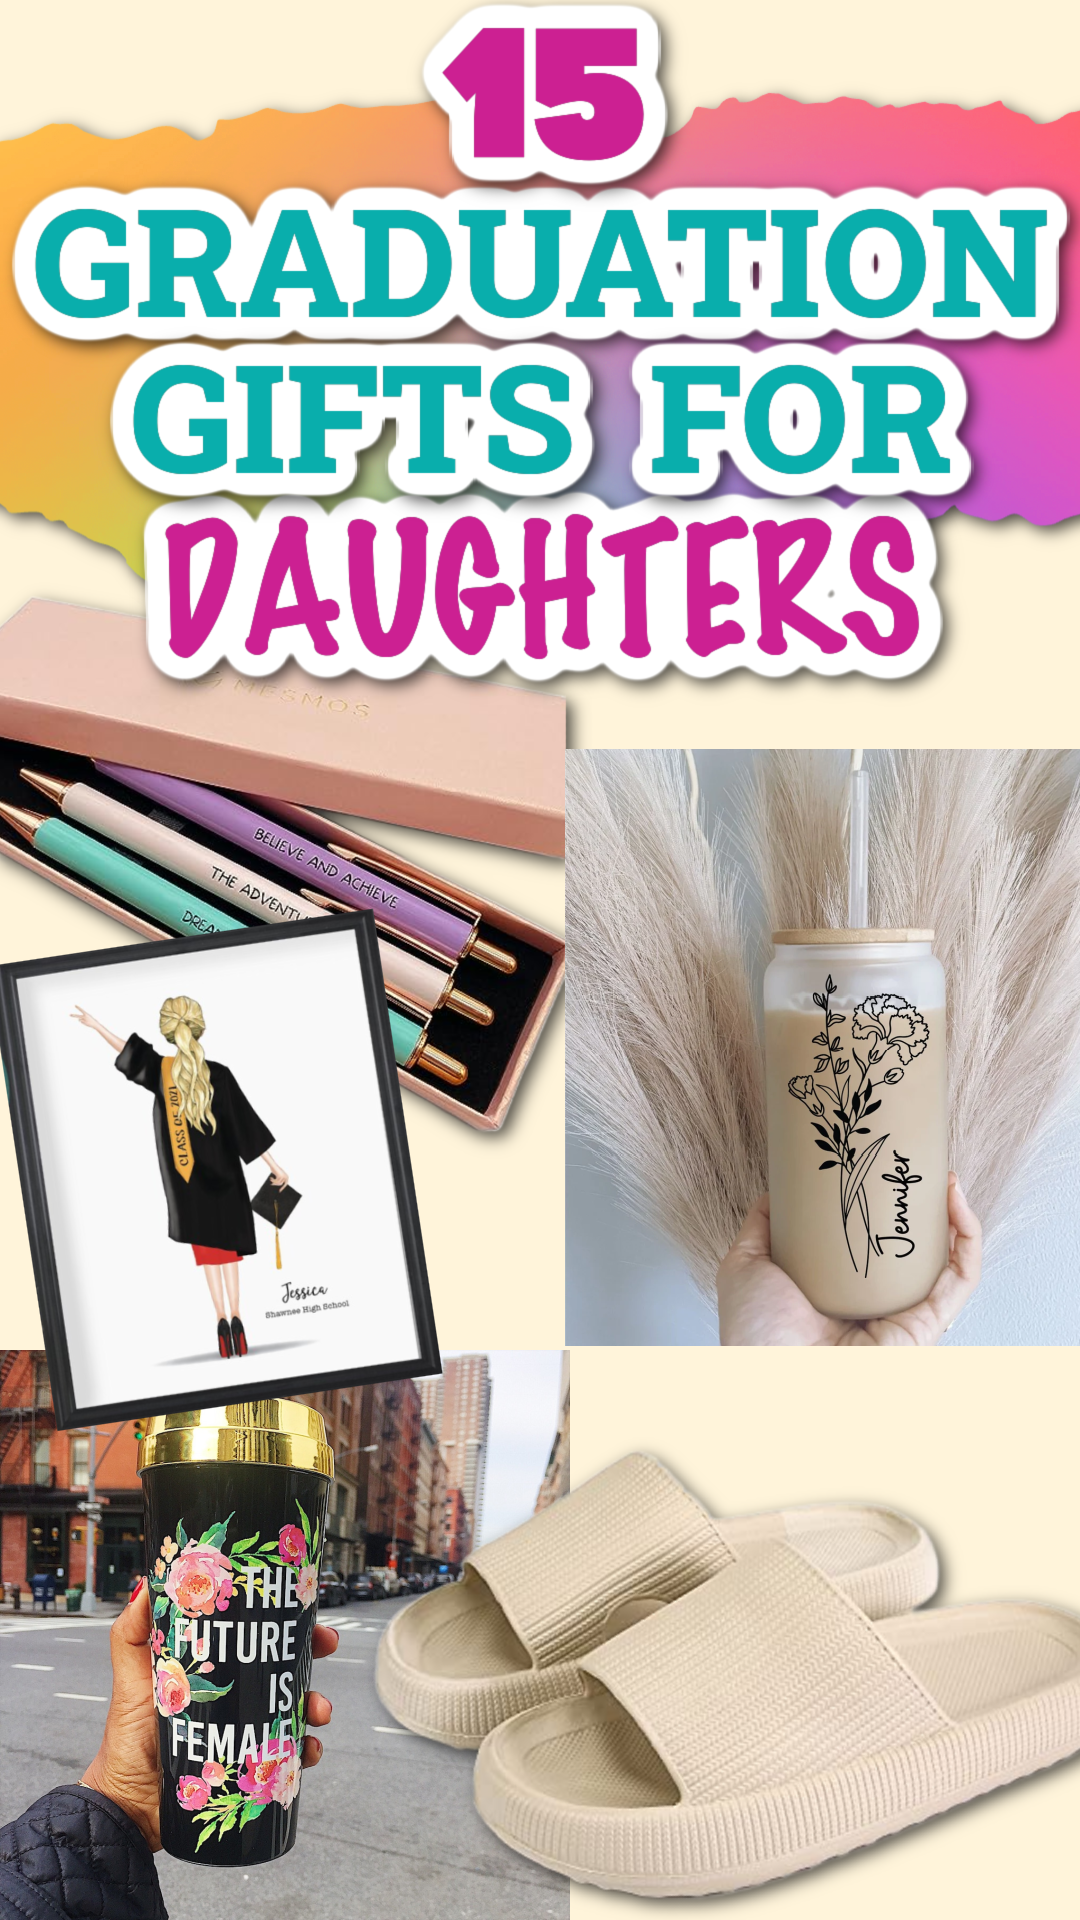 A pin collage of graduation gifts for daughters including a travel mugs, pens and more.